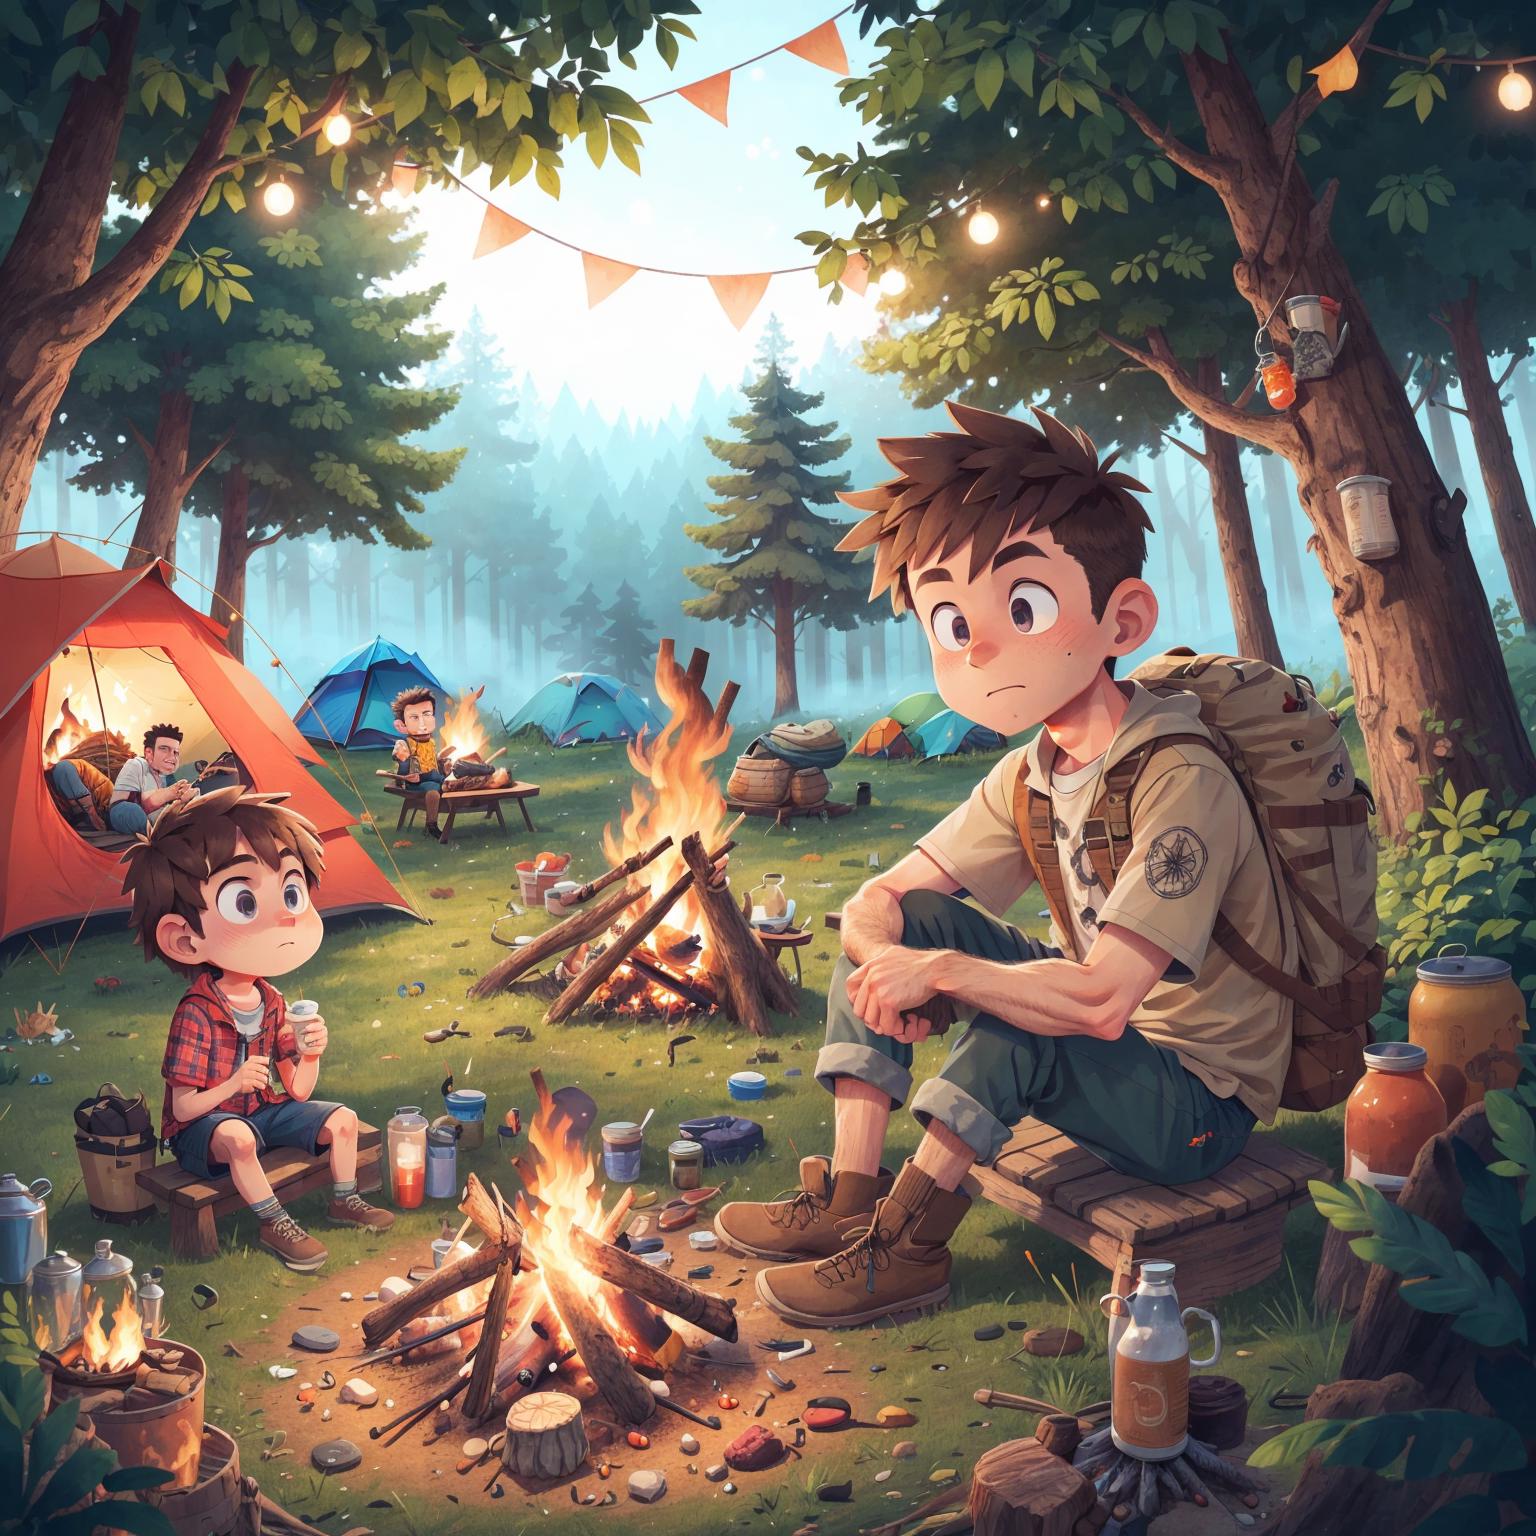 A Boy Scout Camping Trip with a Cartoon Illustration of a Boy Scout, Little Brother, and a Boy Scout Leader Sitting Around a Campfire